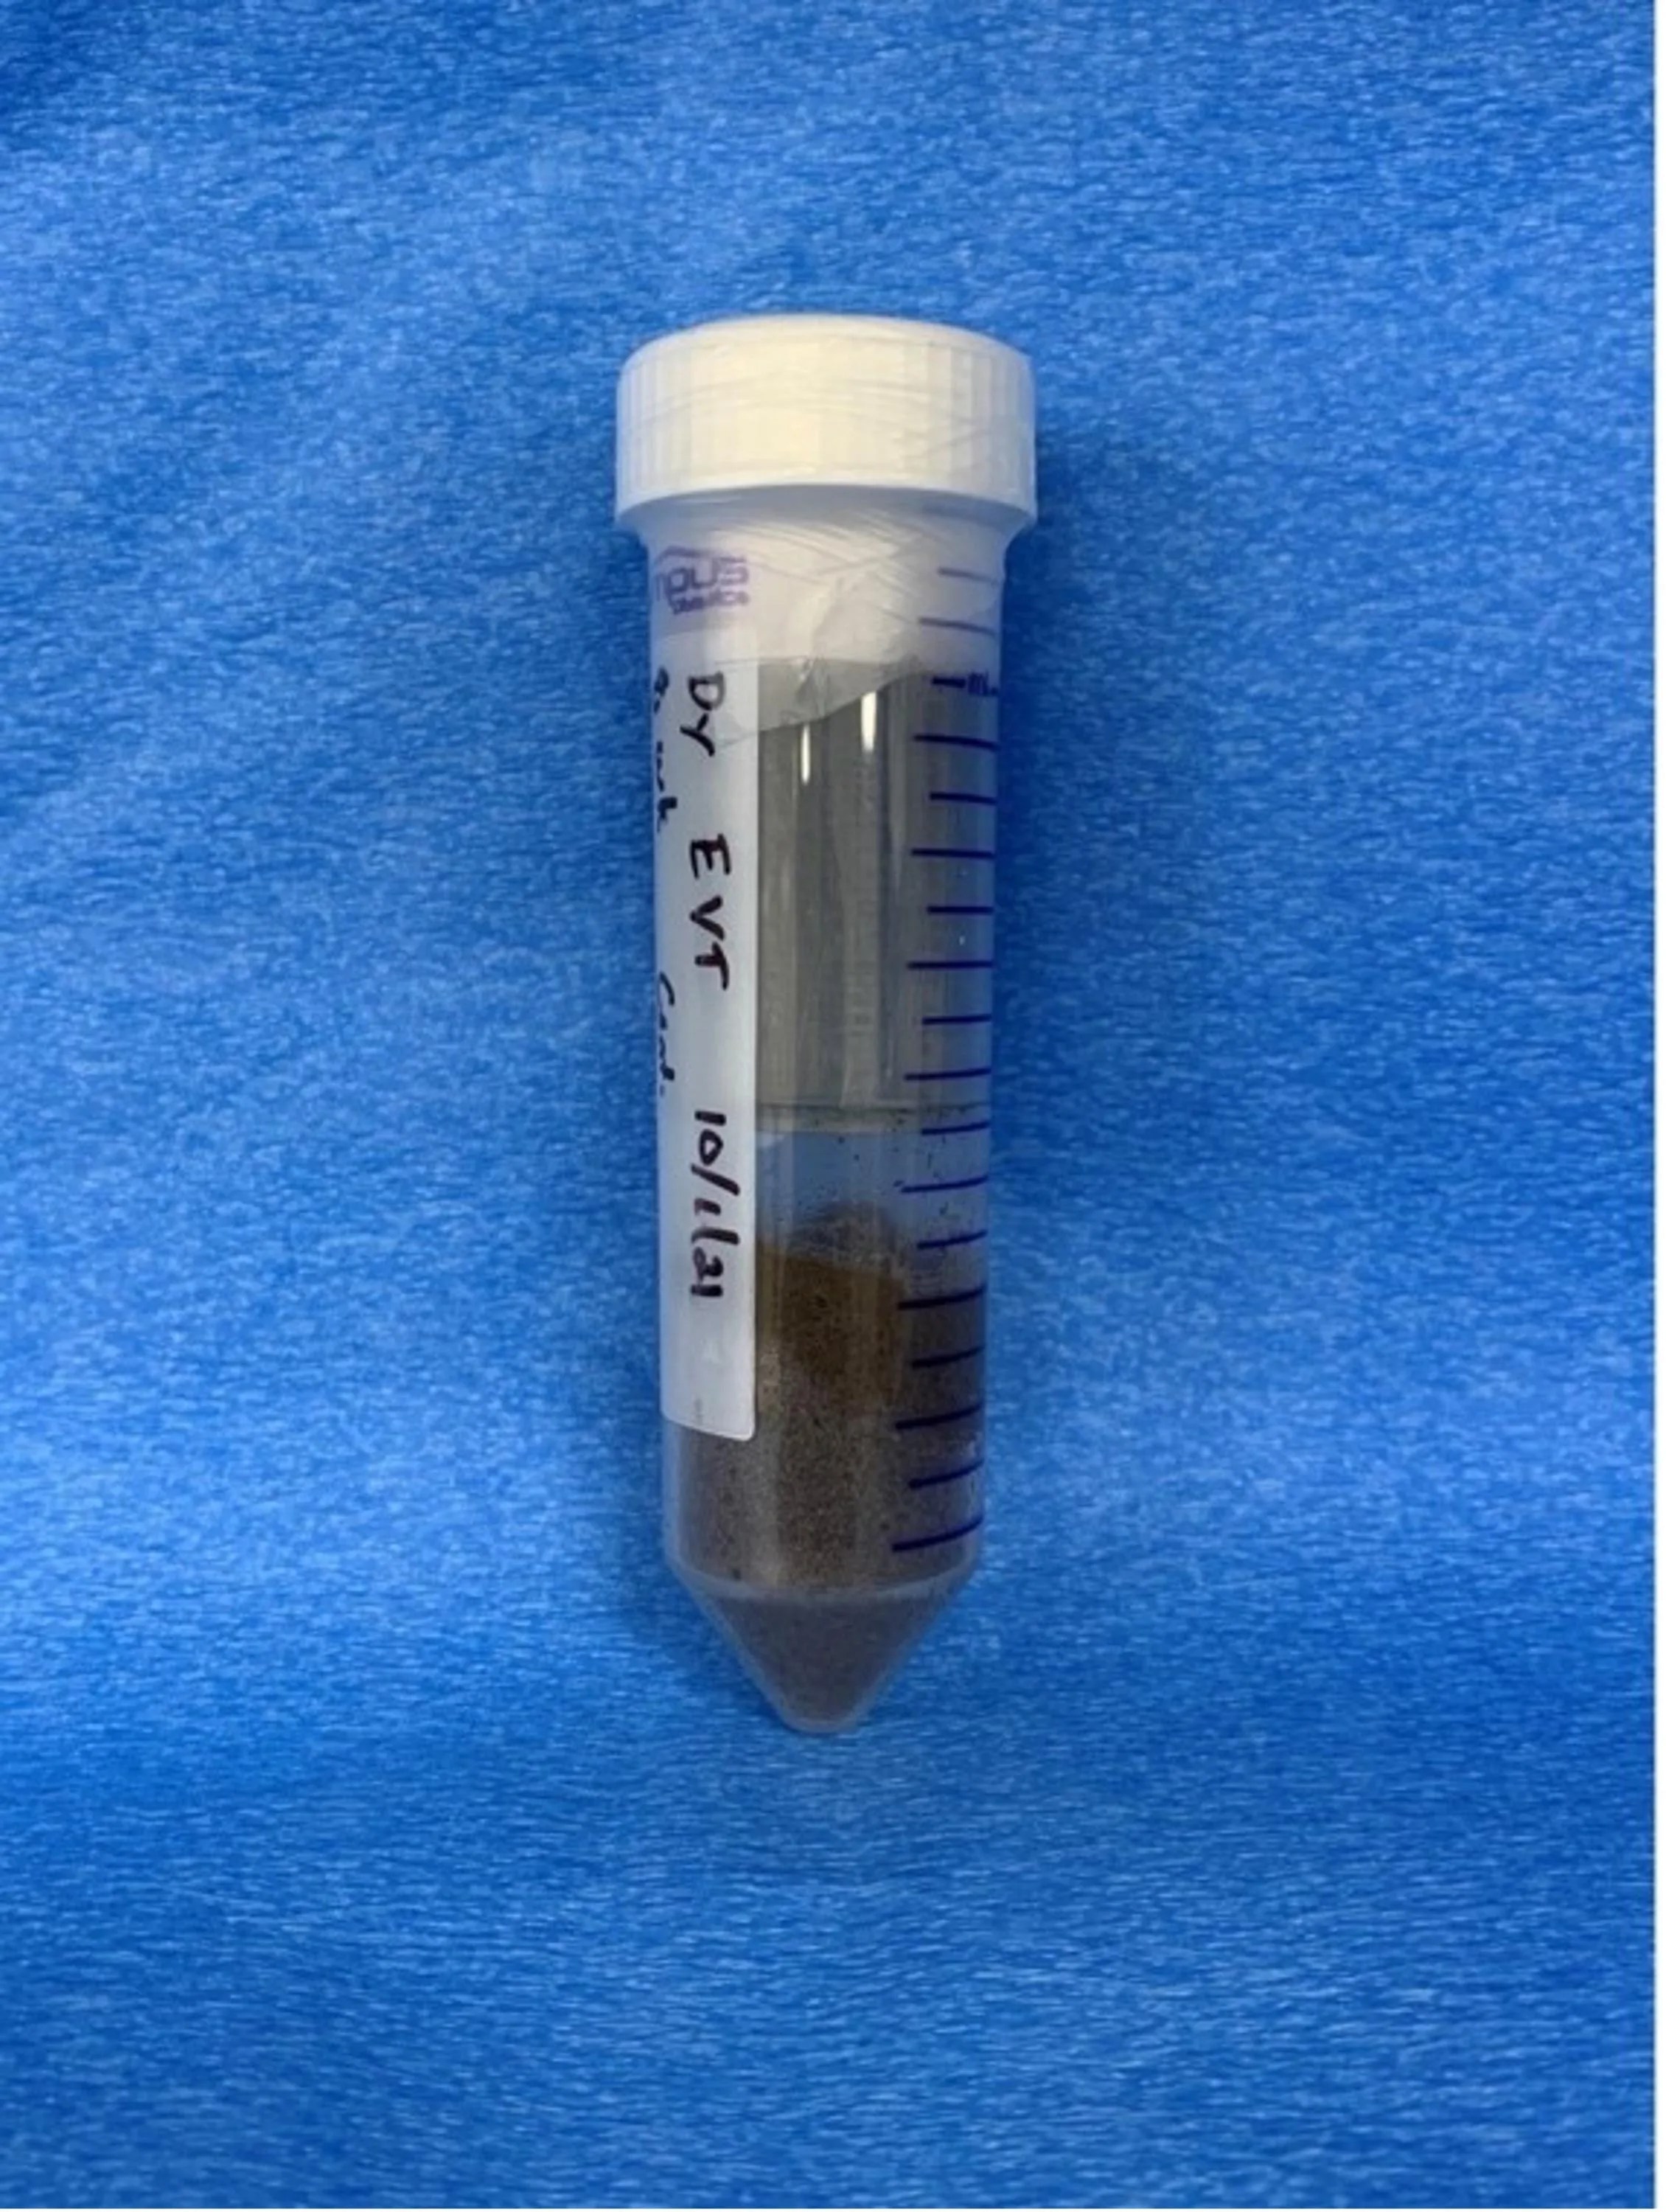 50 mL centrifuge tube with a white stopper at the top of the tube. The bottom 25% of the tube contains dark soil.